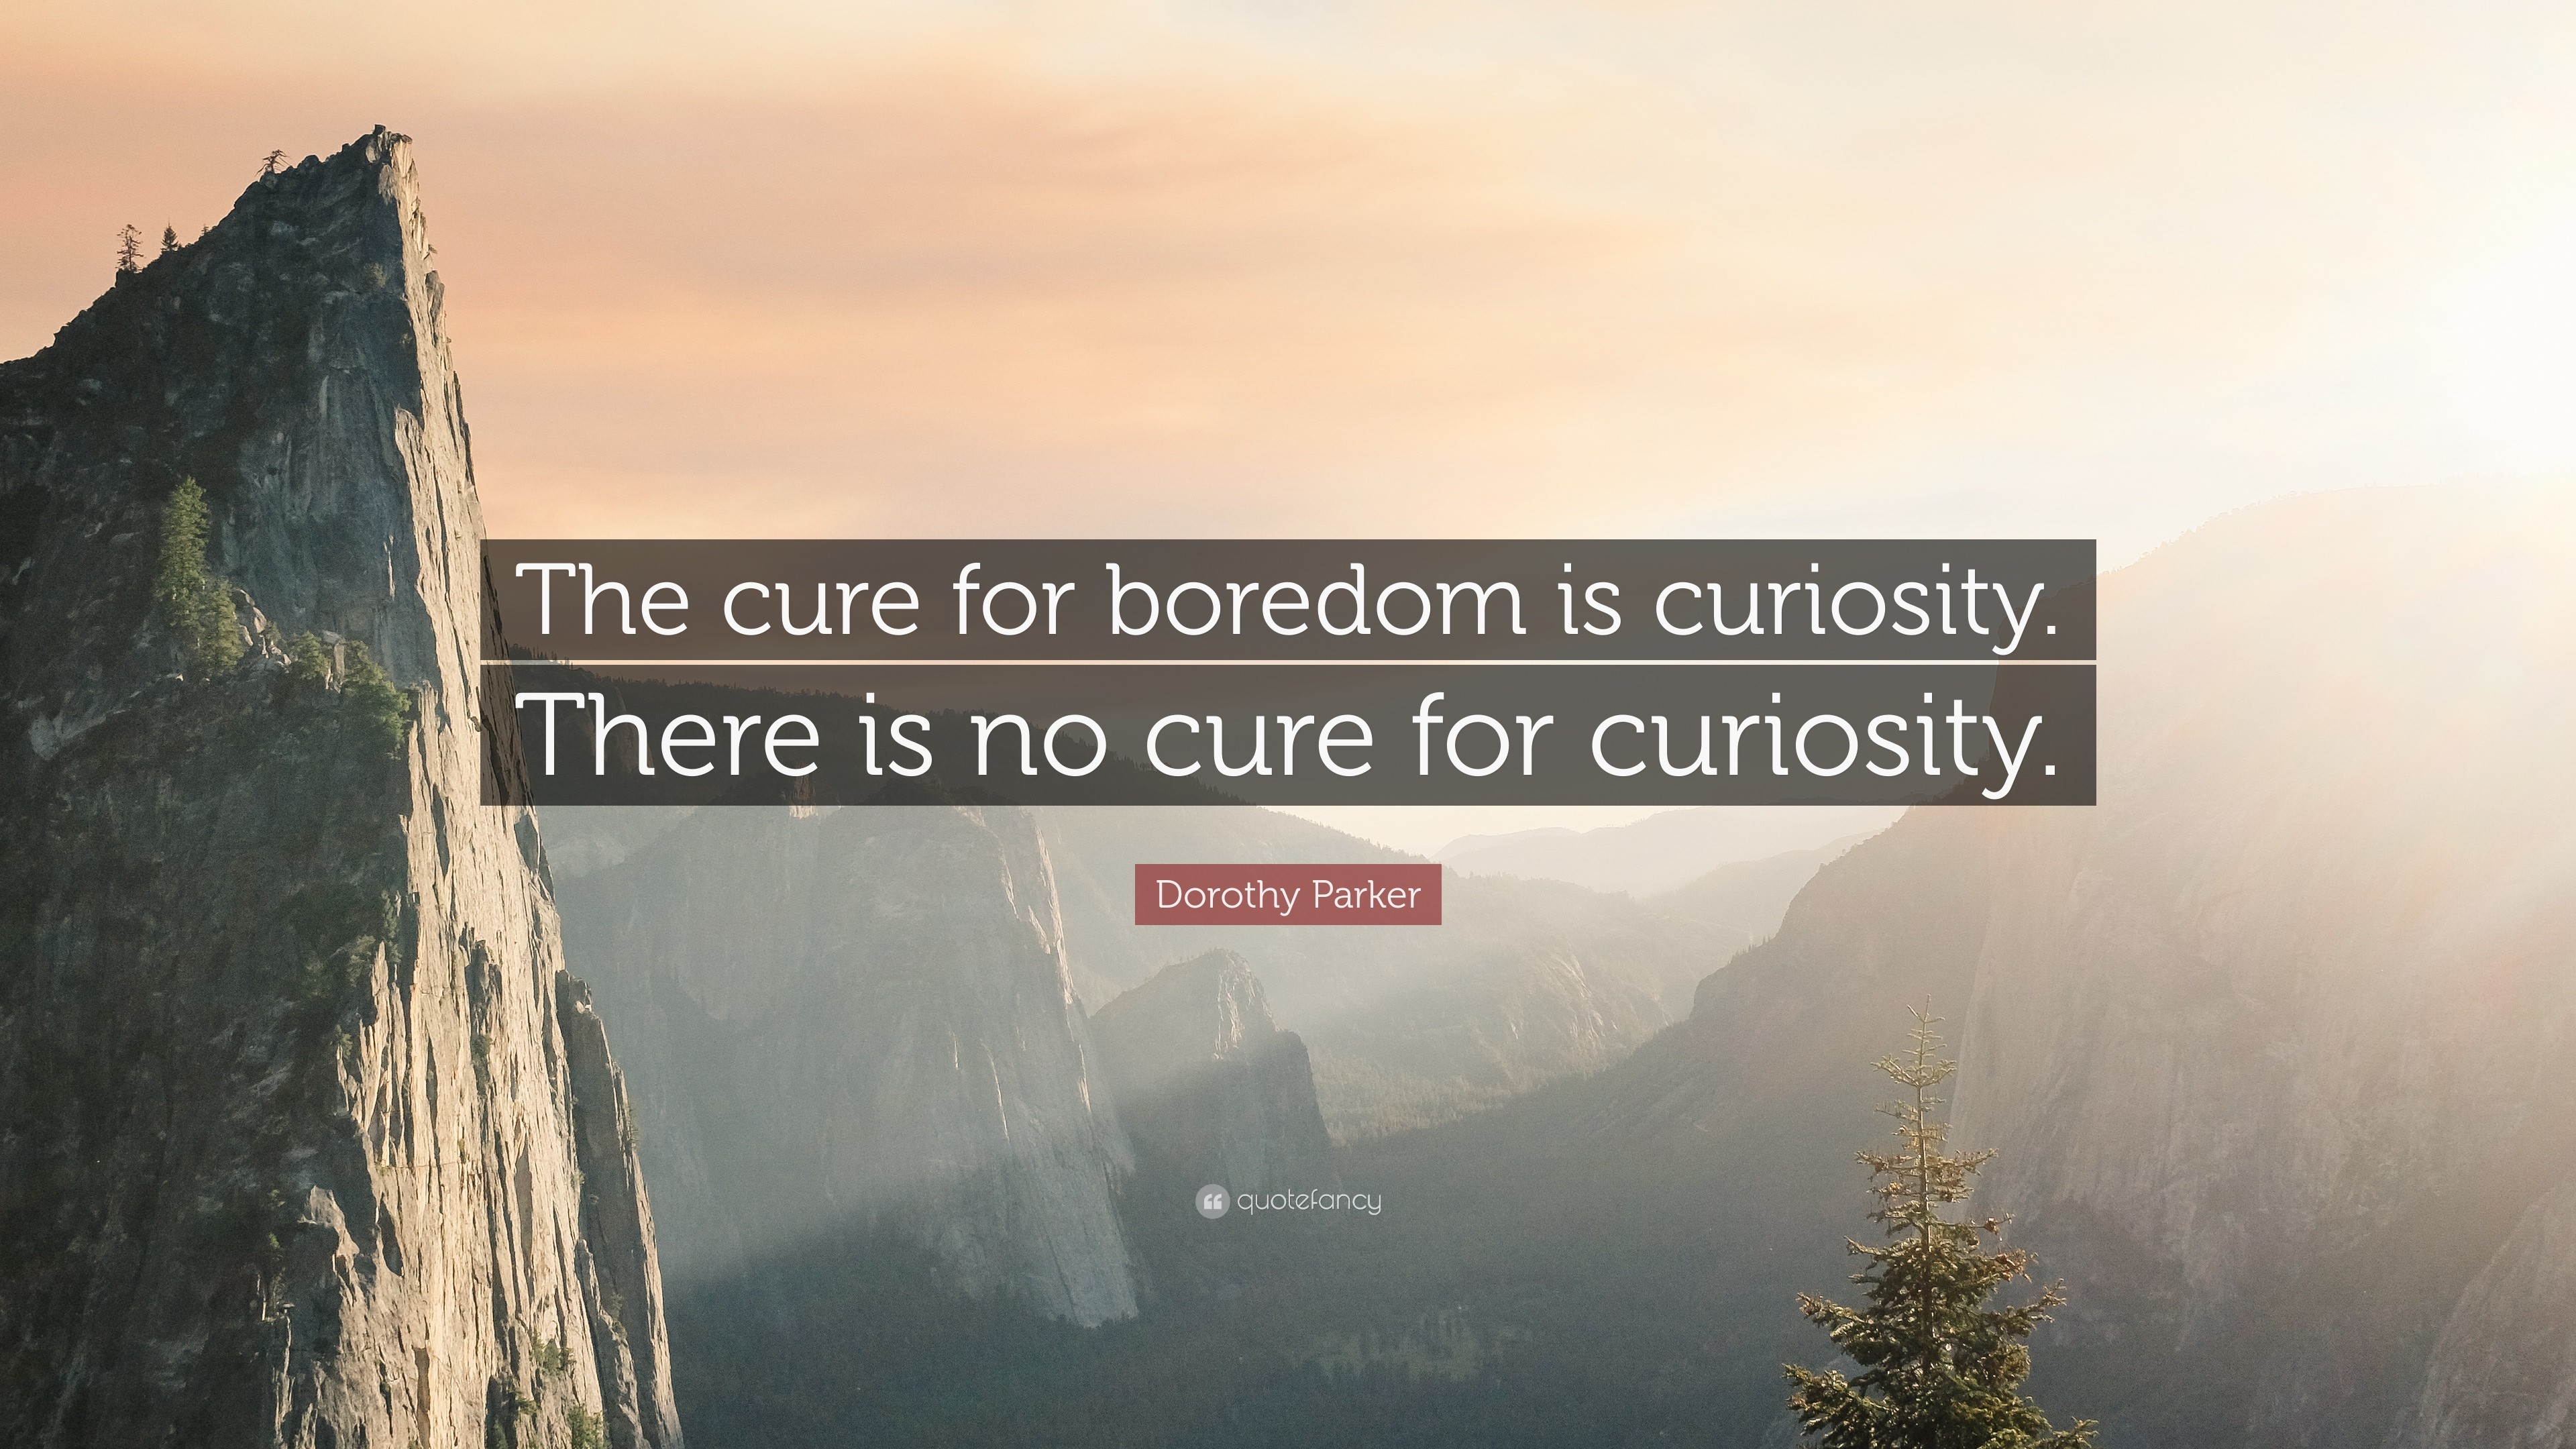 3840x2160 Dorothy Parker Quote: “The cure for boredom is curiosity. There is no cure